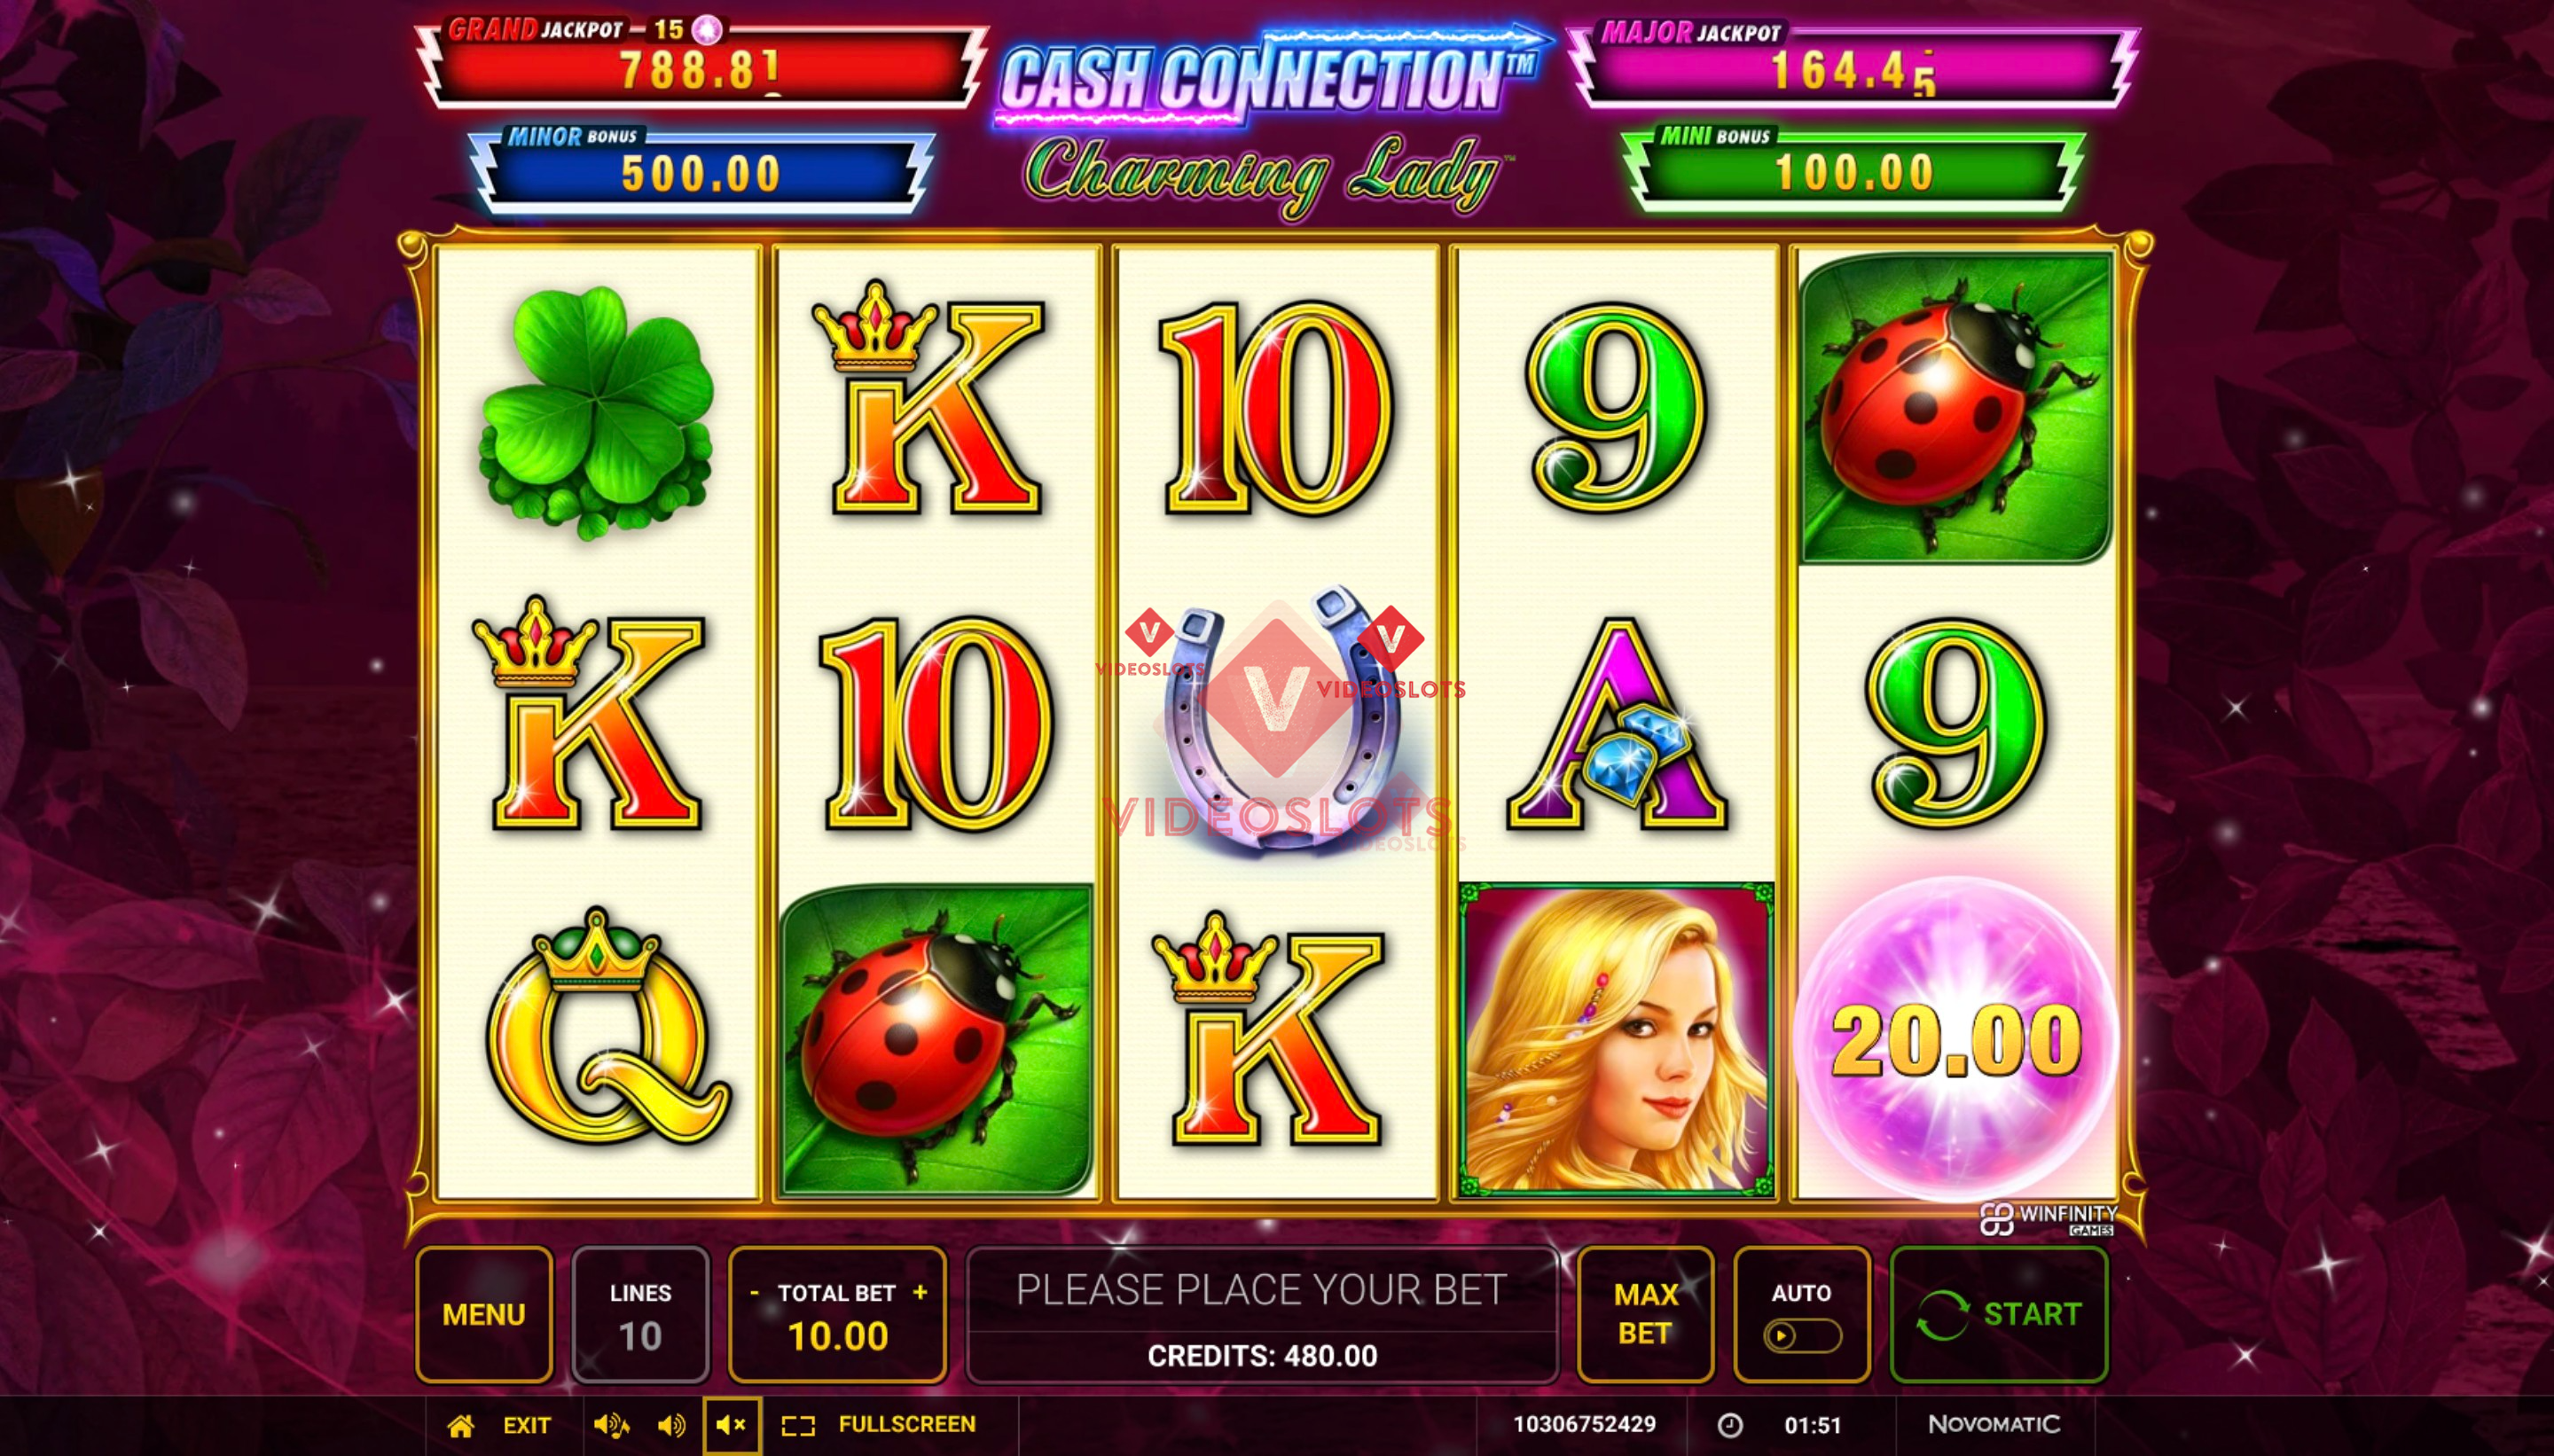 Base Game for Cash Connection Charming Lady slot from Greentube